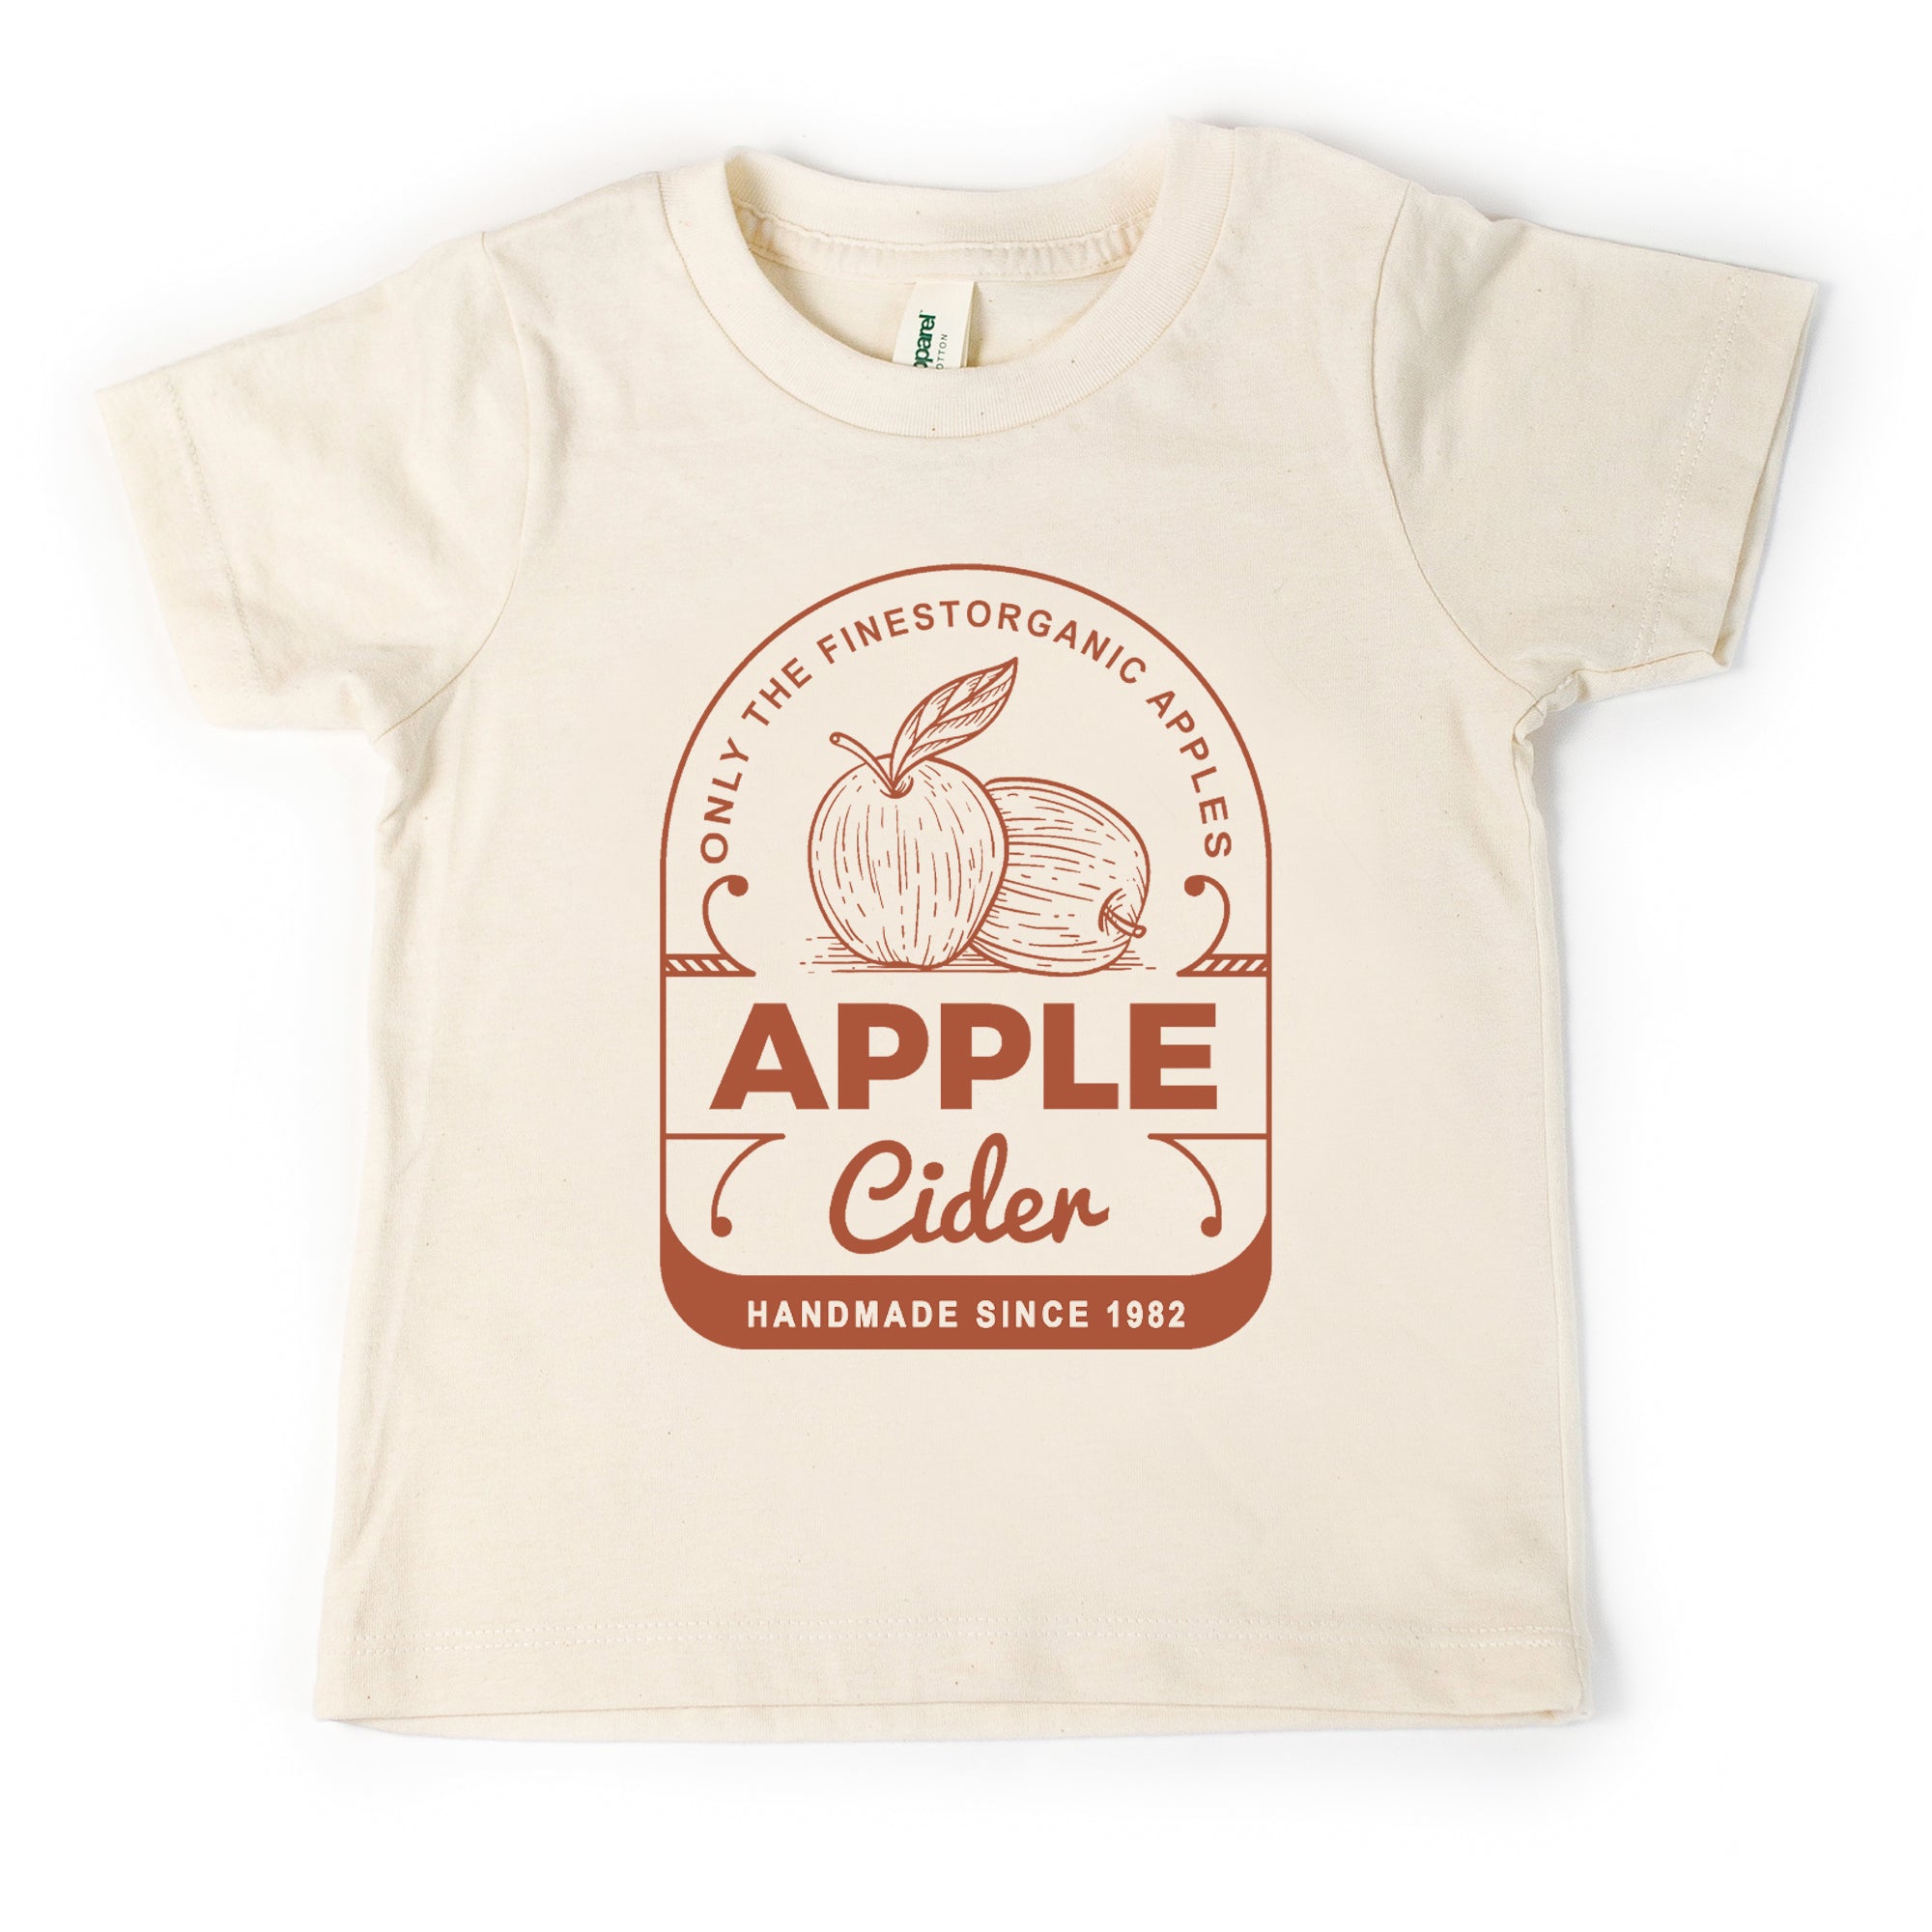 Apple Cider, natural tshirt, toddler, youth and adult